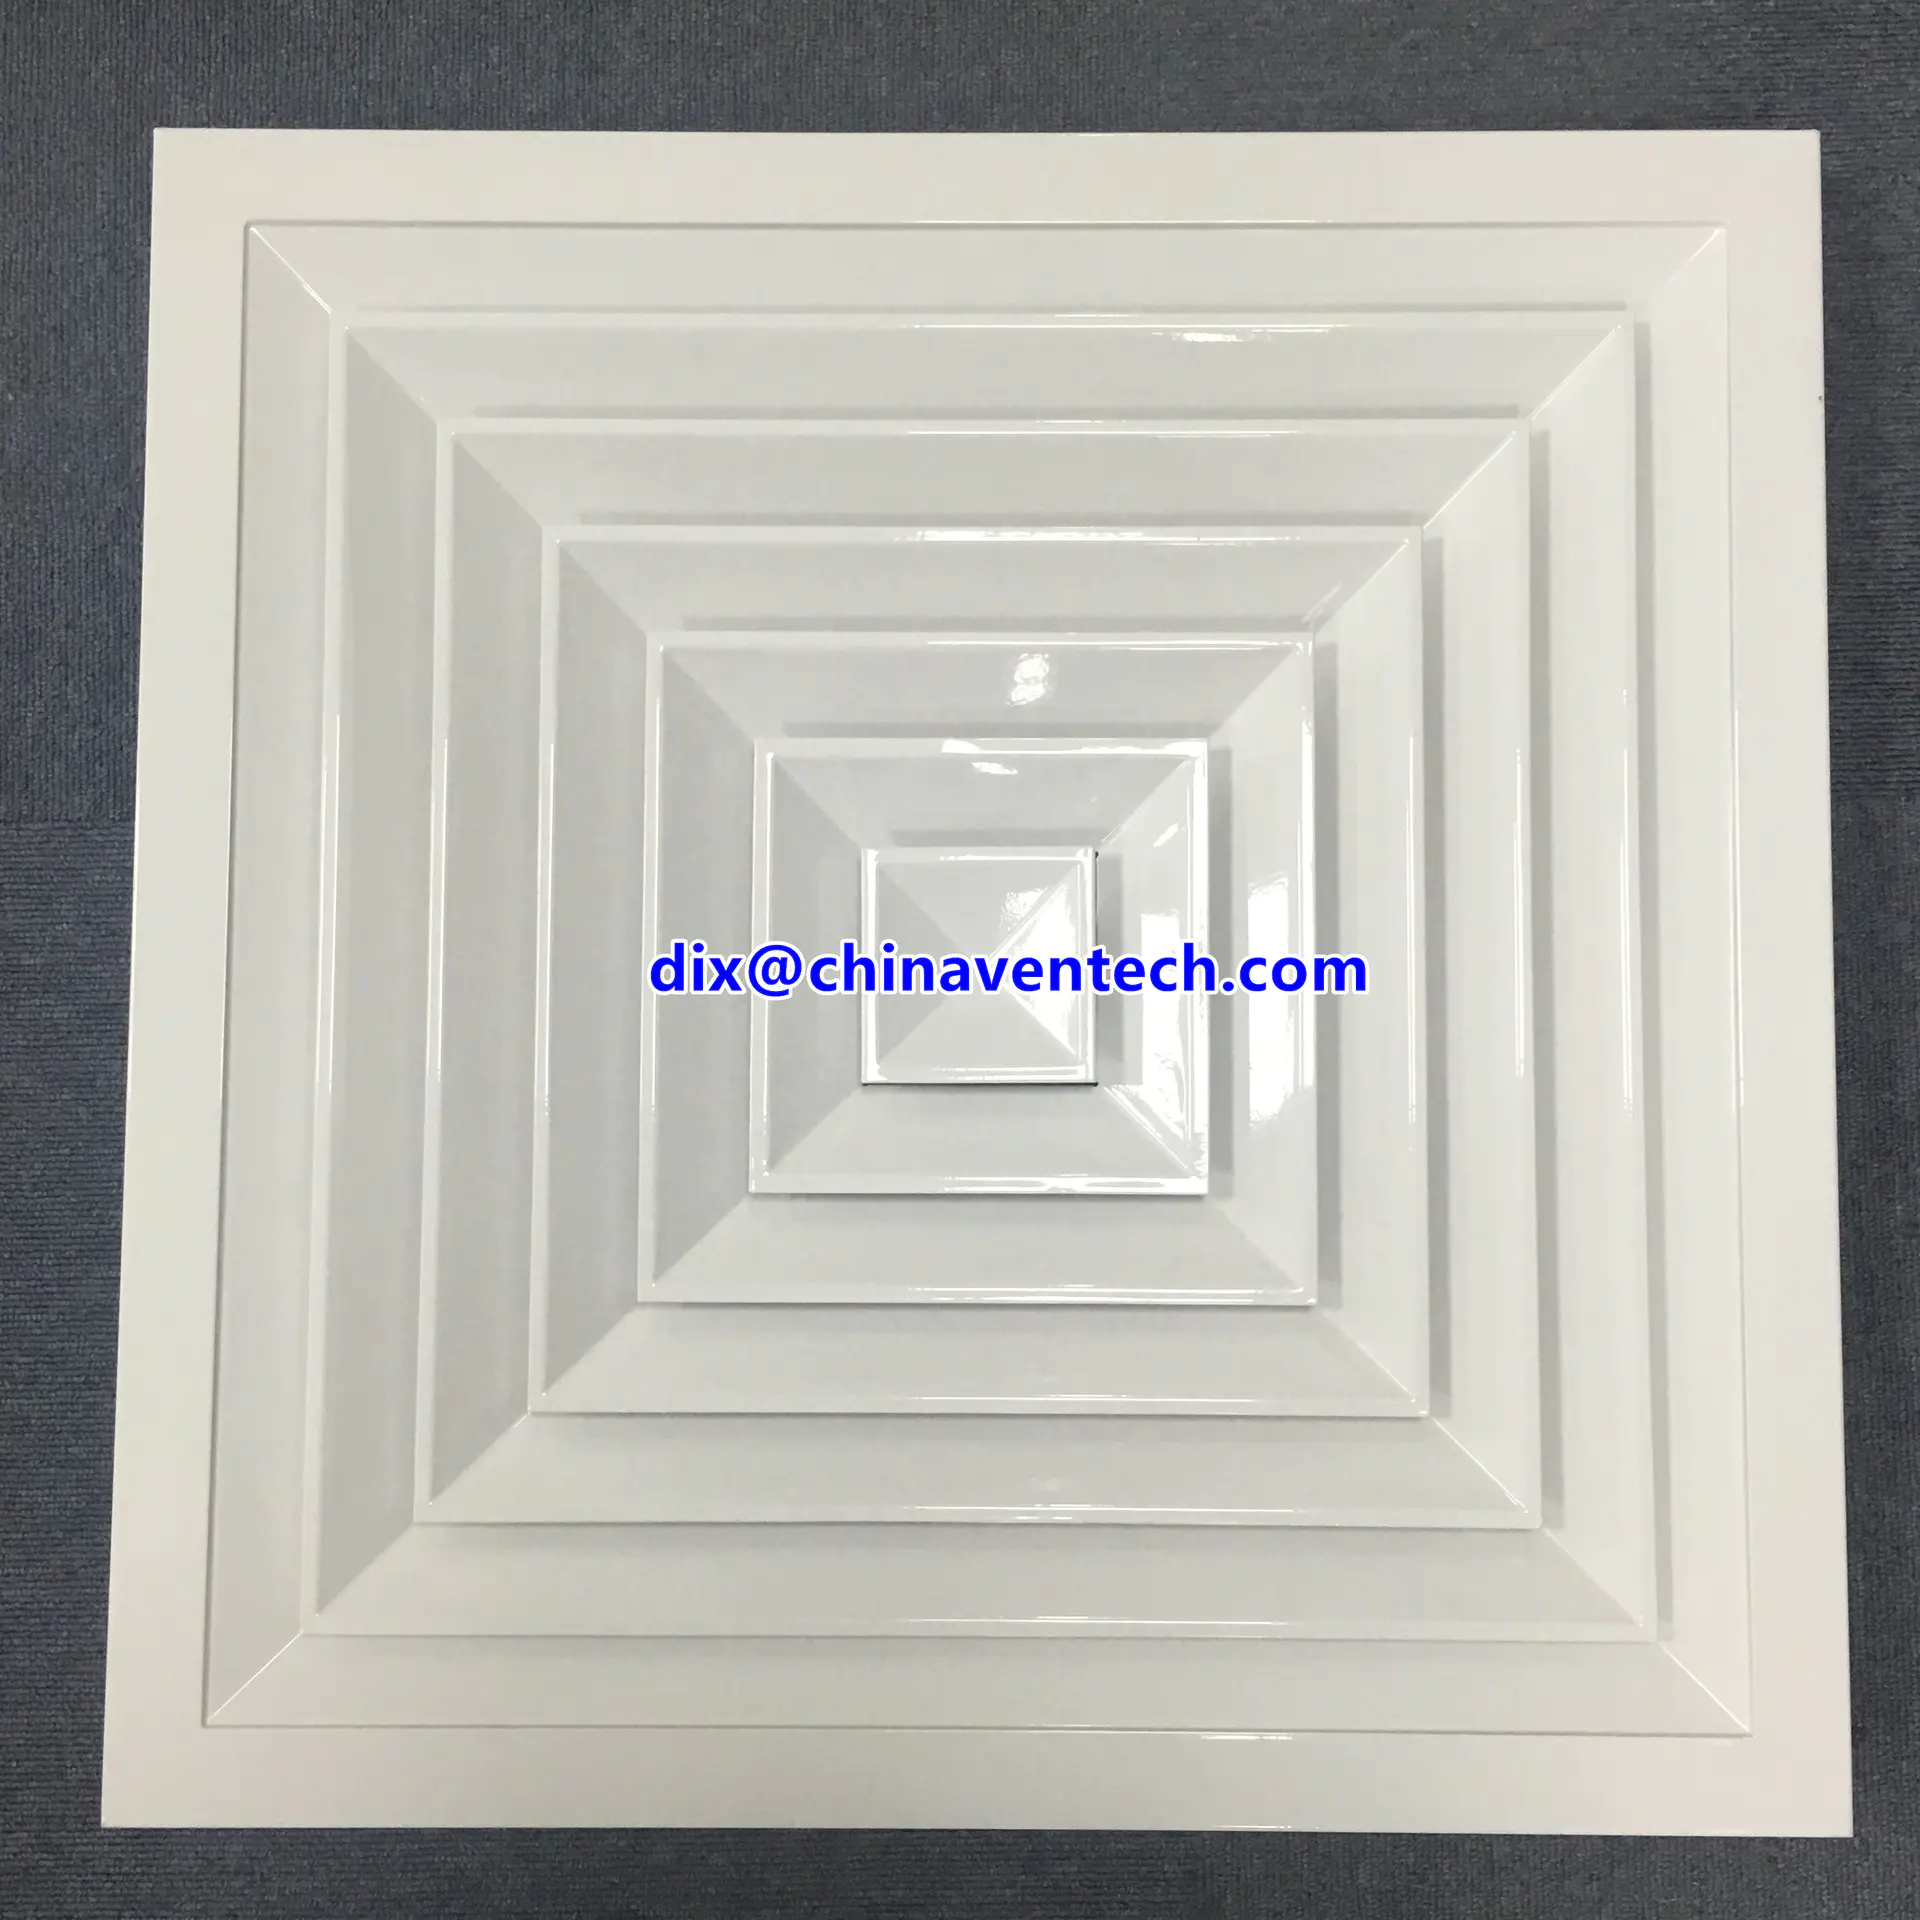 HVAC Ventilation System 4 Way Square Air Grille Exhaust Air Square Ceiling Diffuser